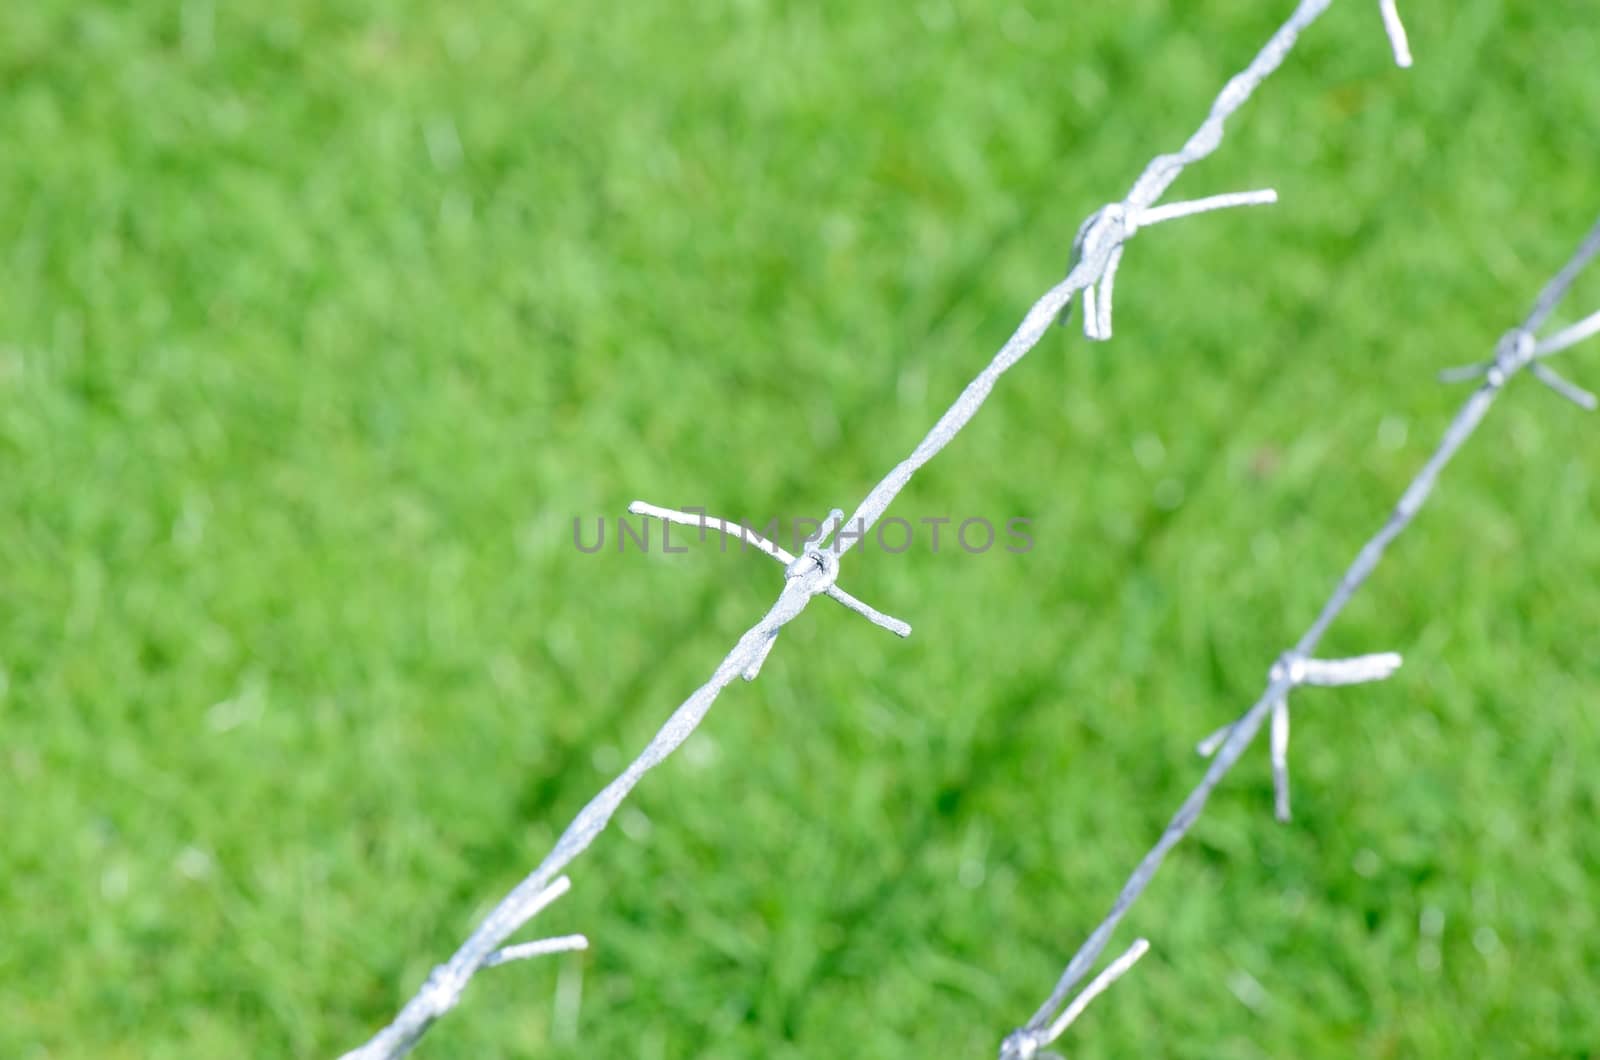 Army barbed wire